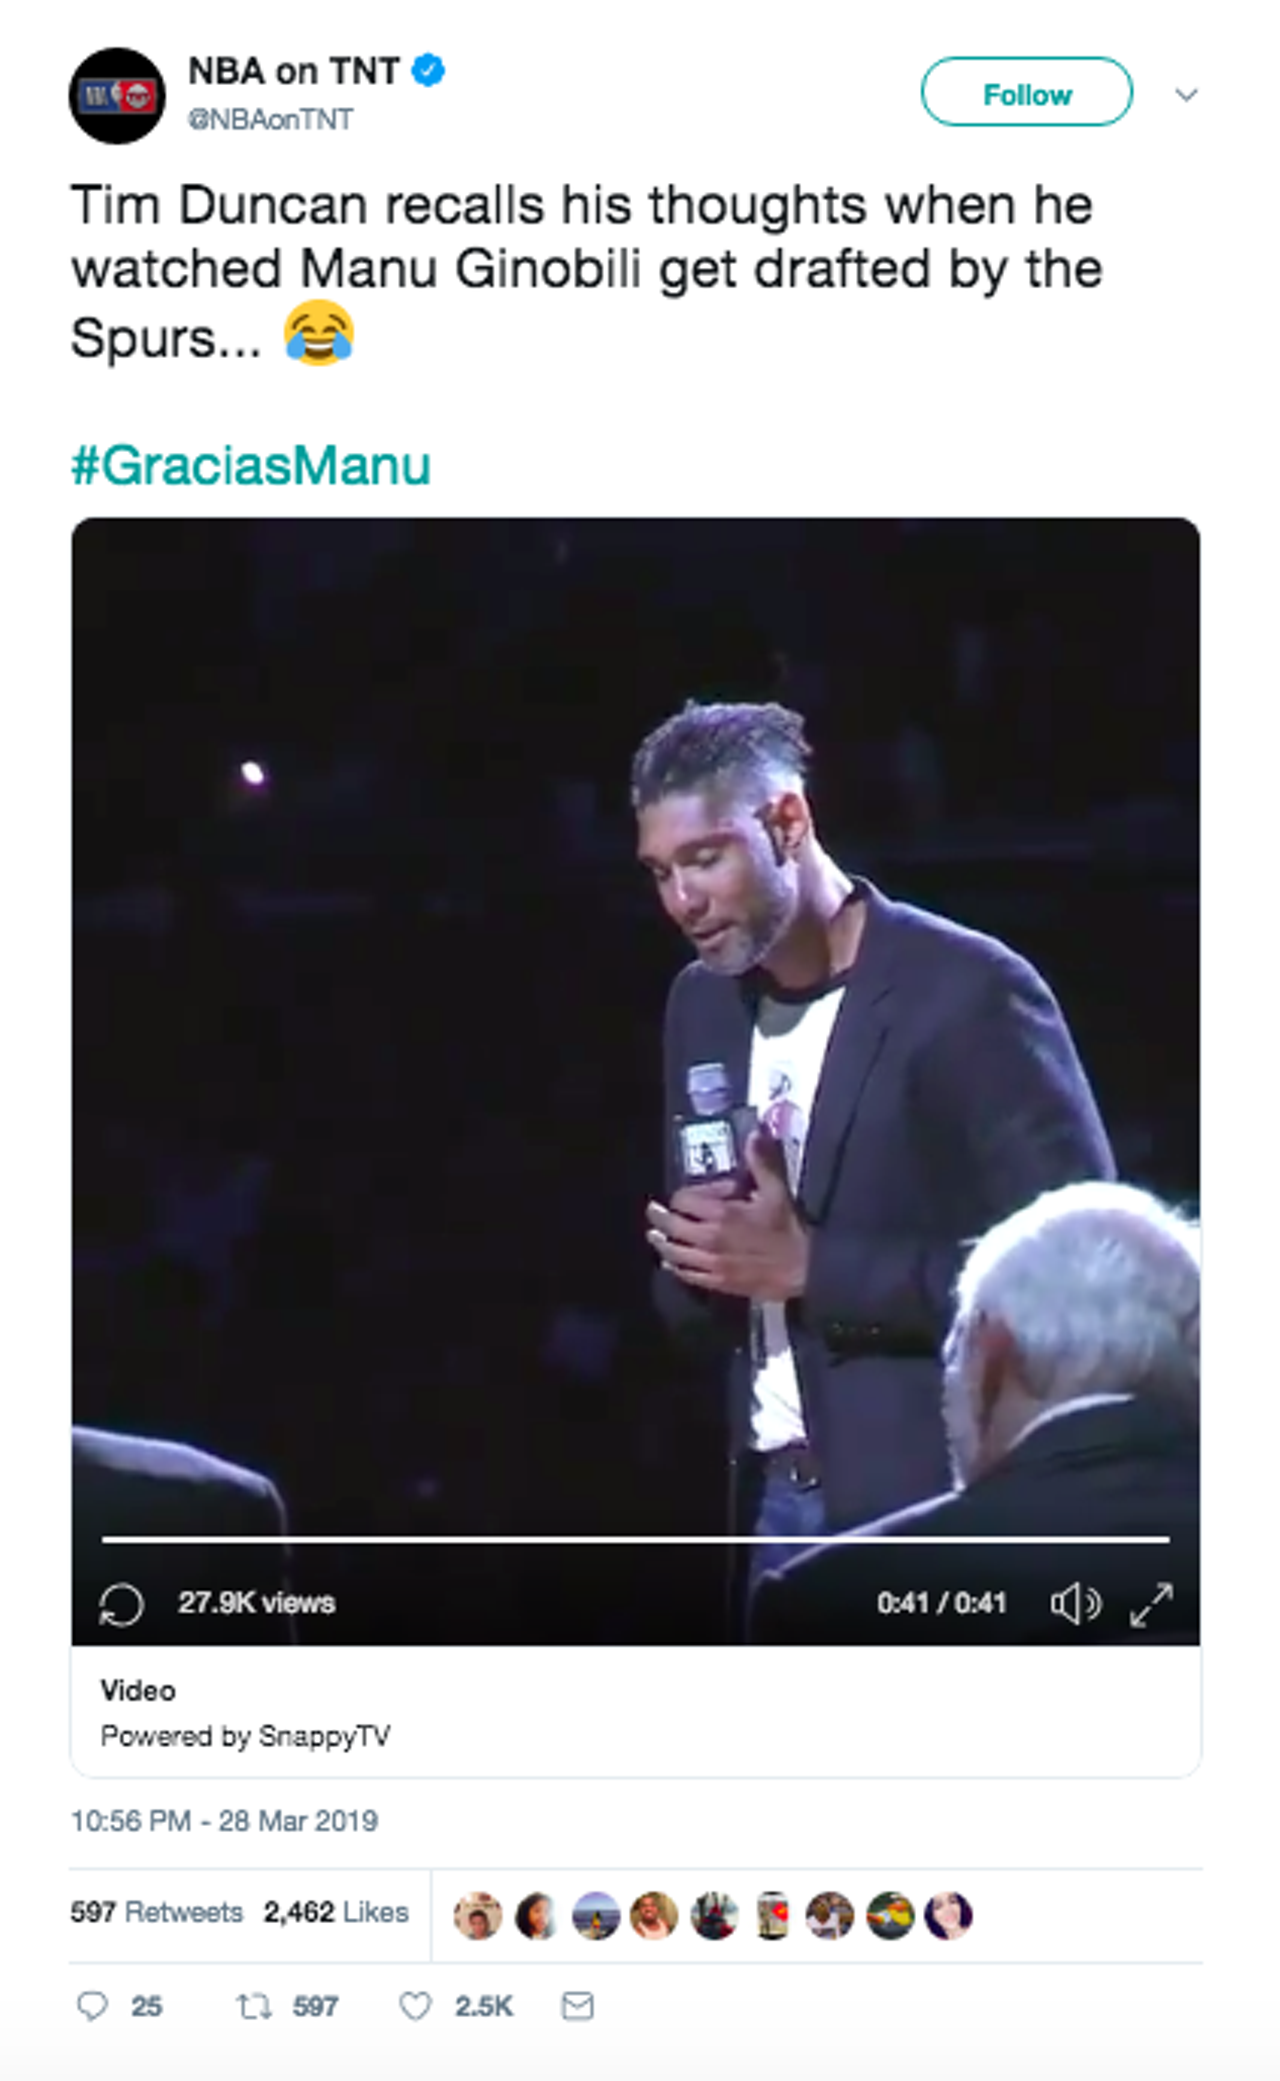 Timmy recalled the moment the Spurs drafted "Emmanual G-no-billy
Source